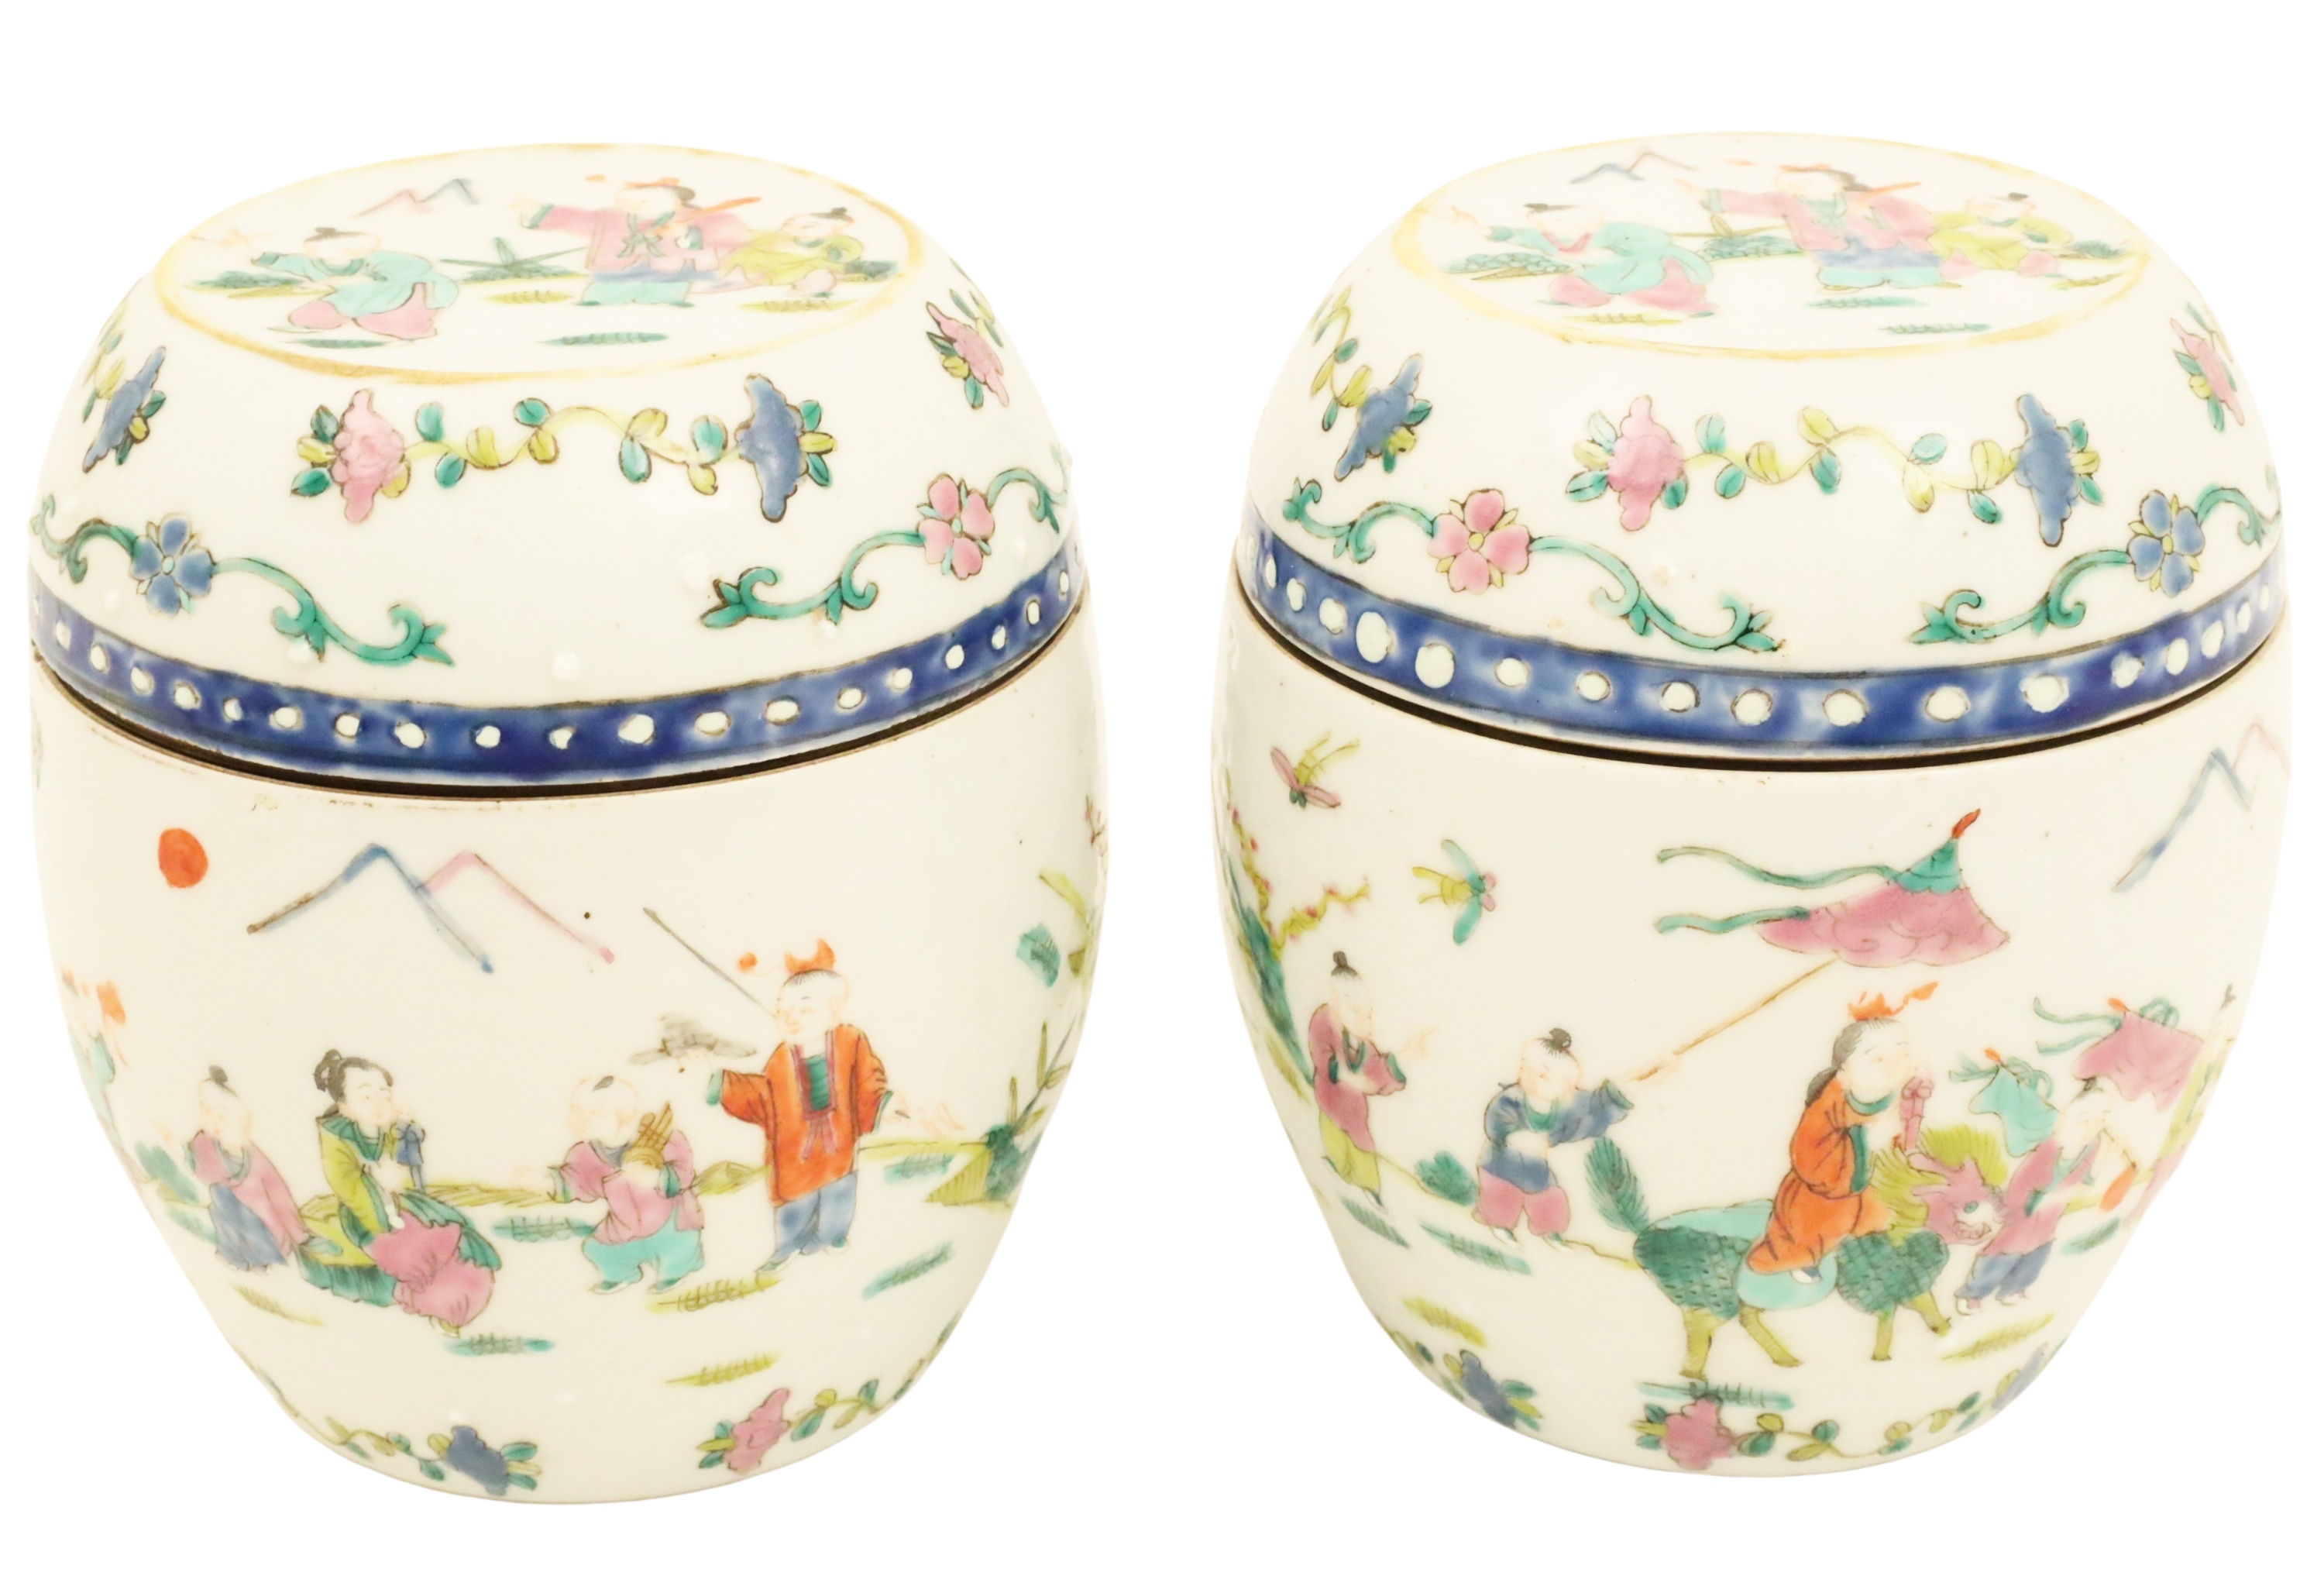 PAIR OF CHINESE PORCELAIN COVERED